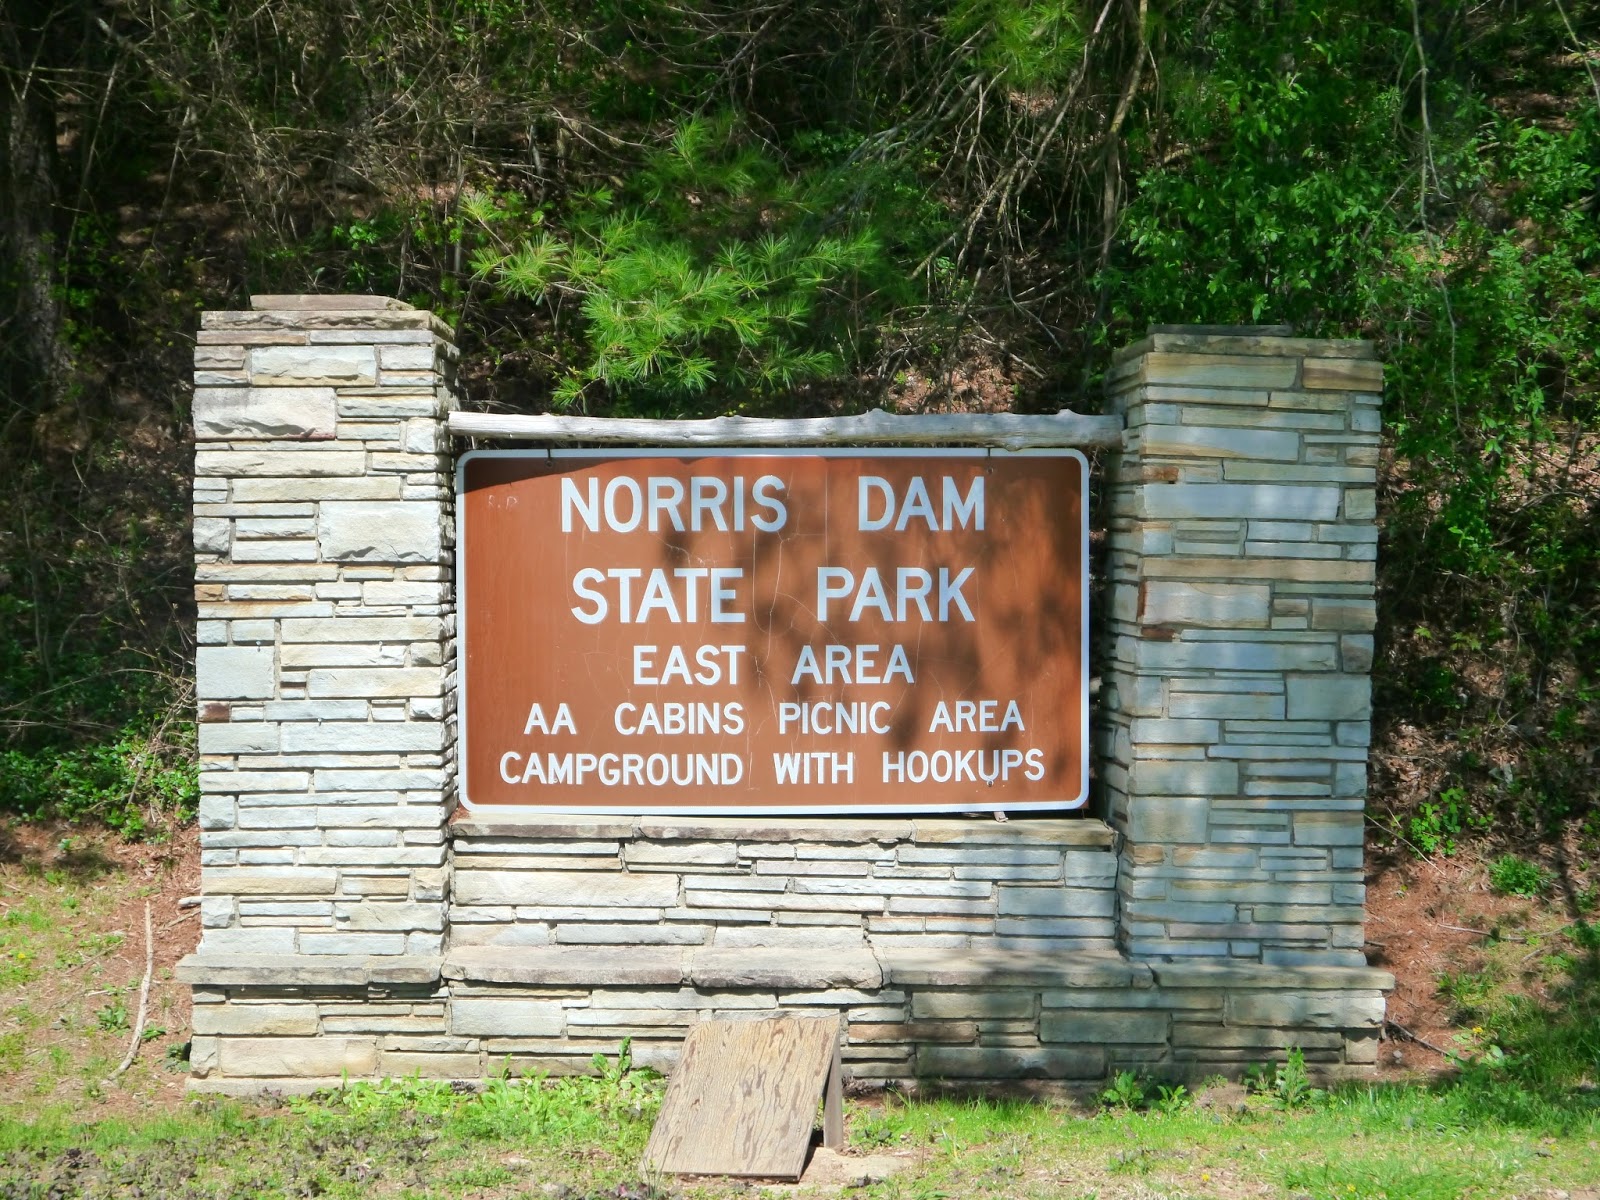 American Travel Journal: East Area Hiking - Norris Dam State Park